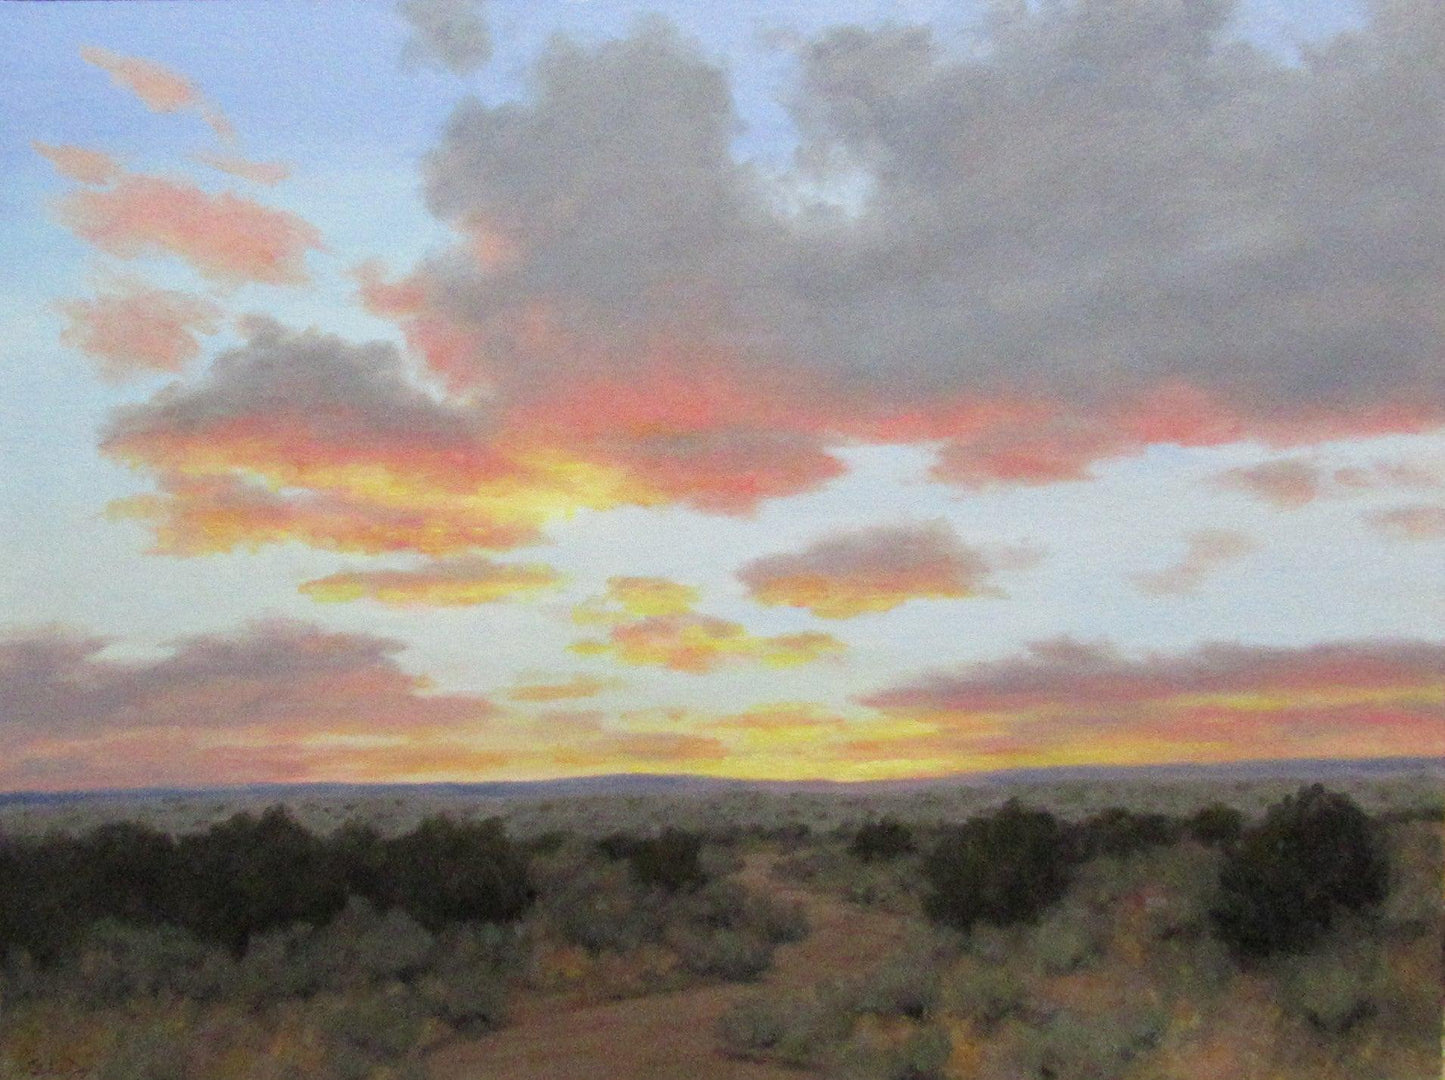 Light and Color-Painting-Stephen Day-Sorrel Sky Gallery